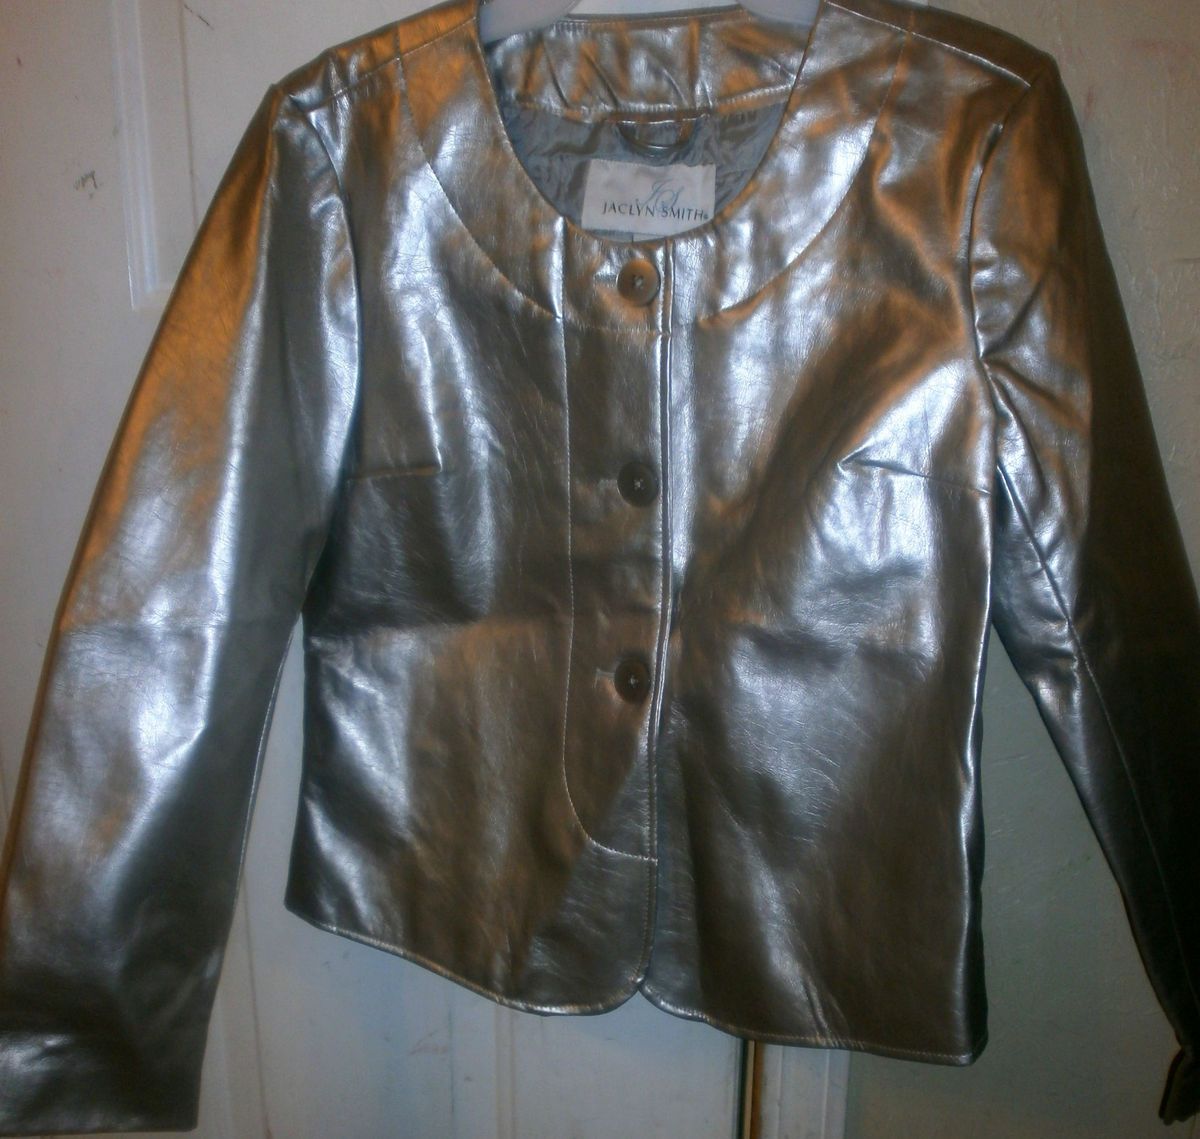 Silver Faux Leather Jacket Jaclyn Smith Silver Shiny Small Christmas